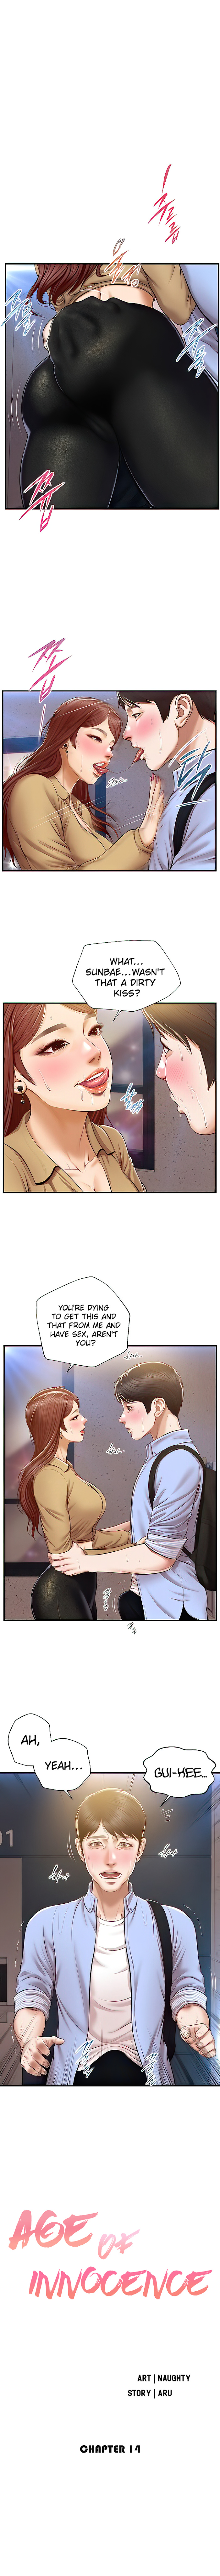 Age Of Innocence - Page 2